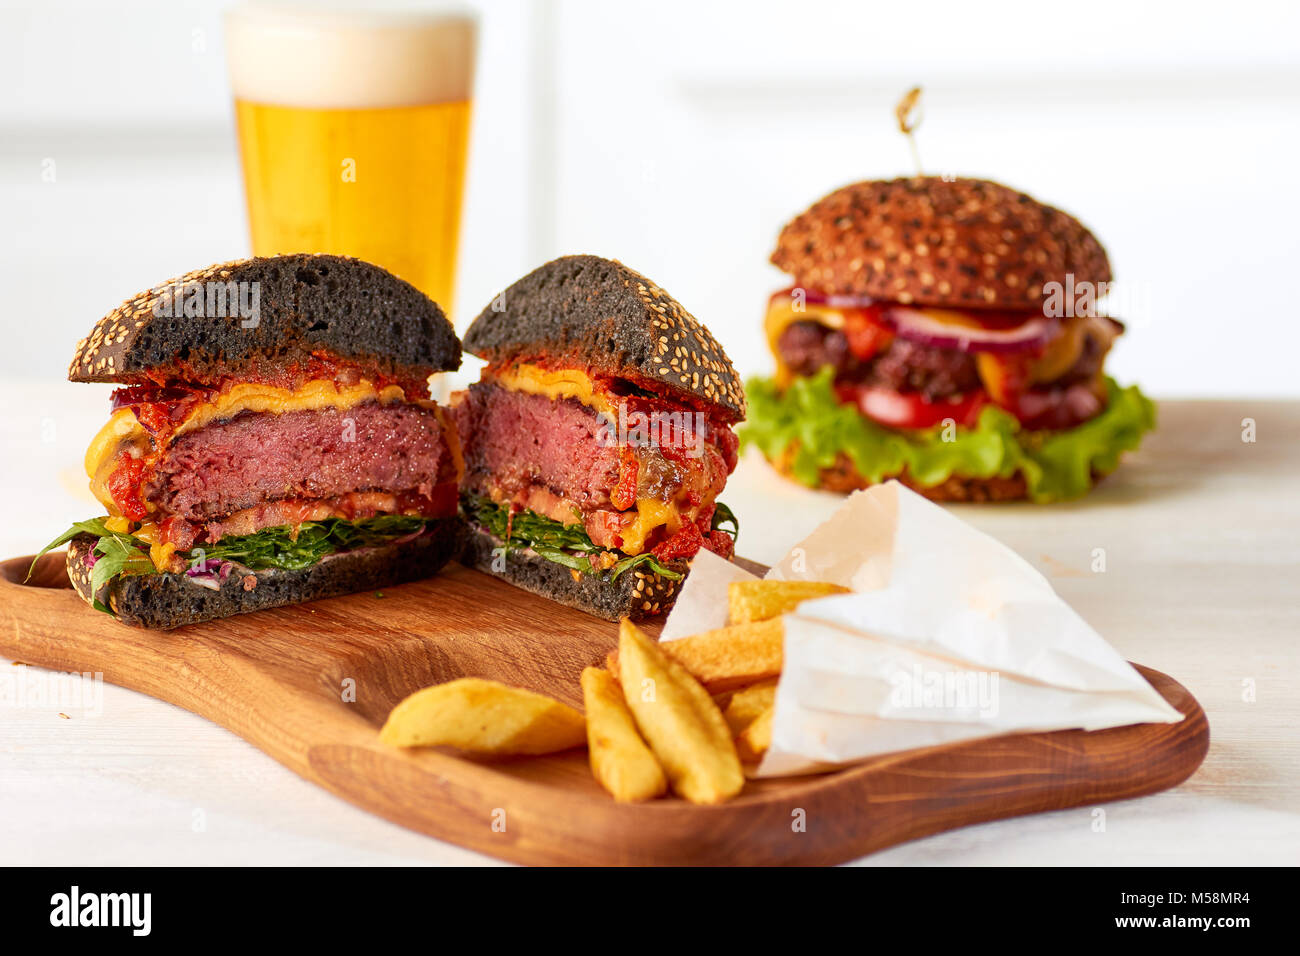 Sliced juicy burger with chips and beer Stock Photo